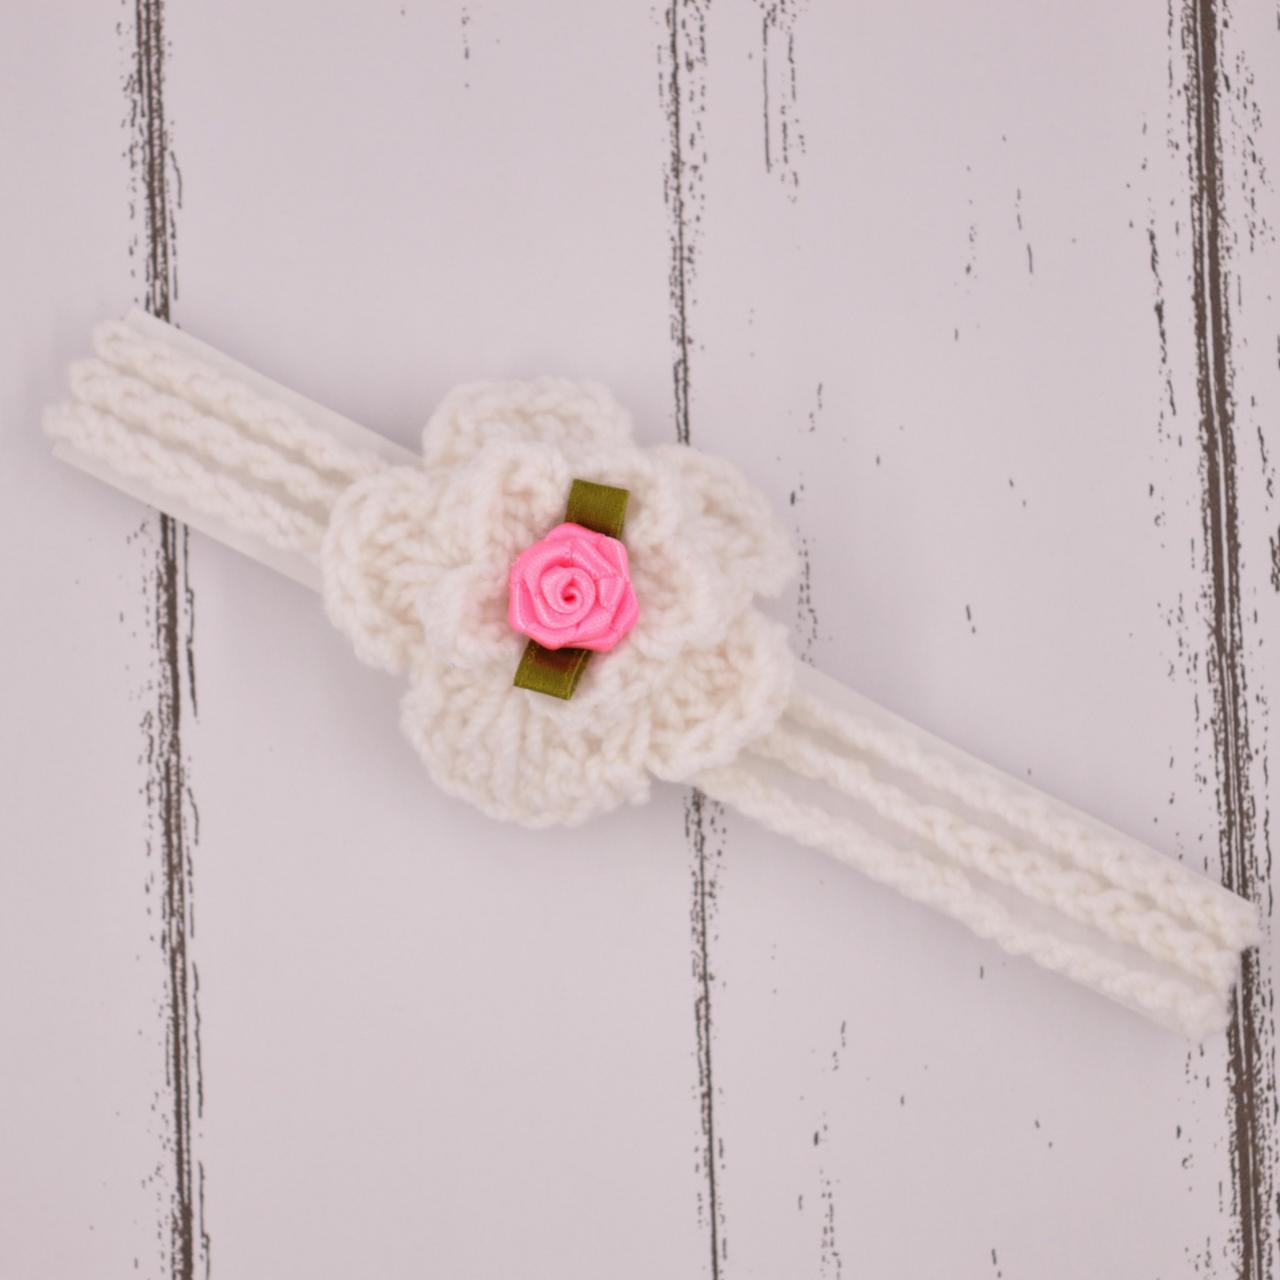 Crochet baby hairband Headband - White with pink flower applique